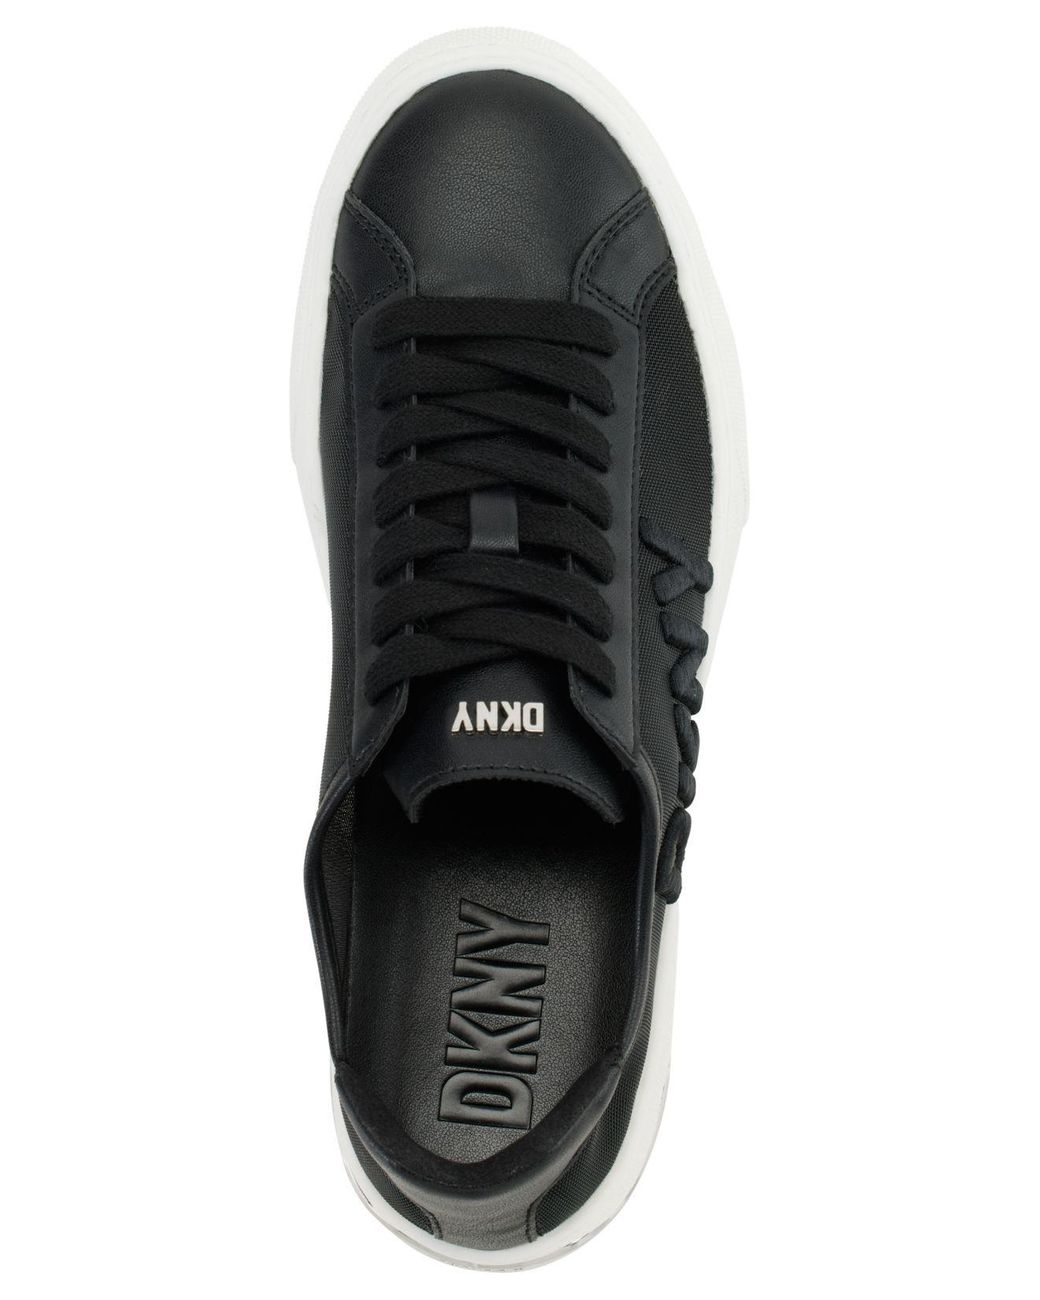 DKNY Sina Lace-up Low-top Sneakers in Black | Lyst